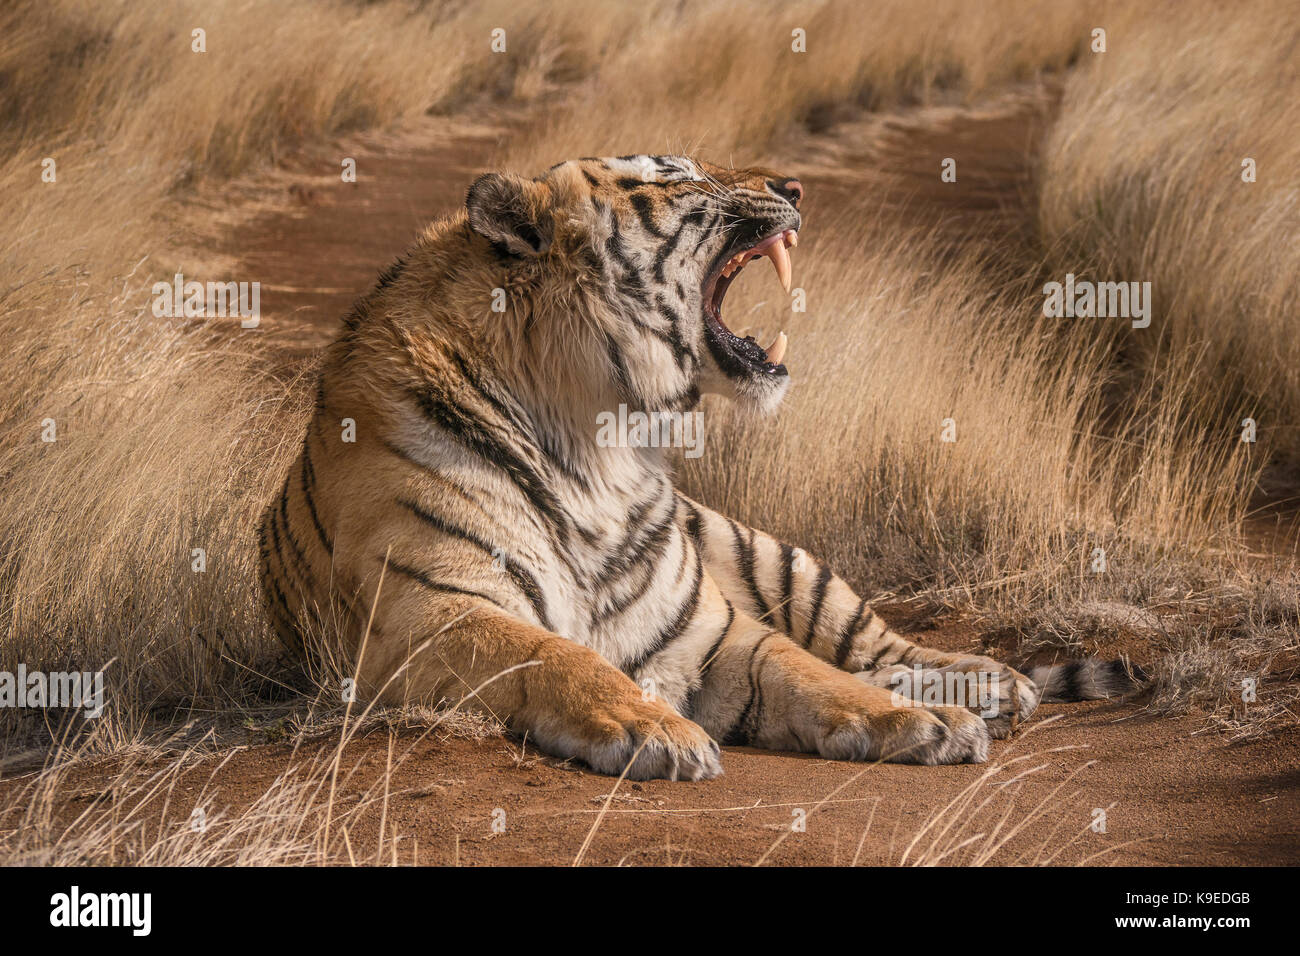 Close-up side view of male tiger with its mouth open and sharp fangs clearly visible along with face profile, chest and forepaws, in natural habitat. Stock Photo